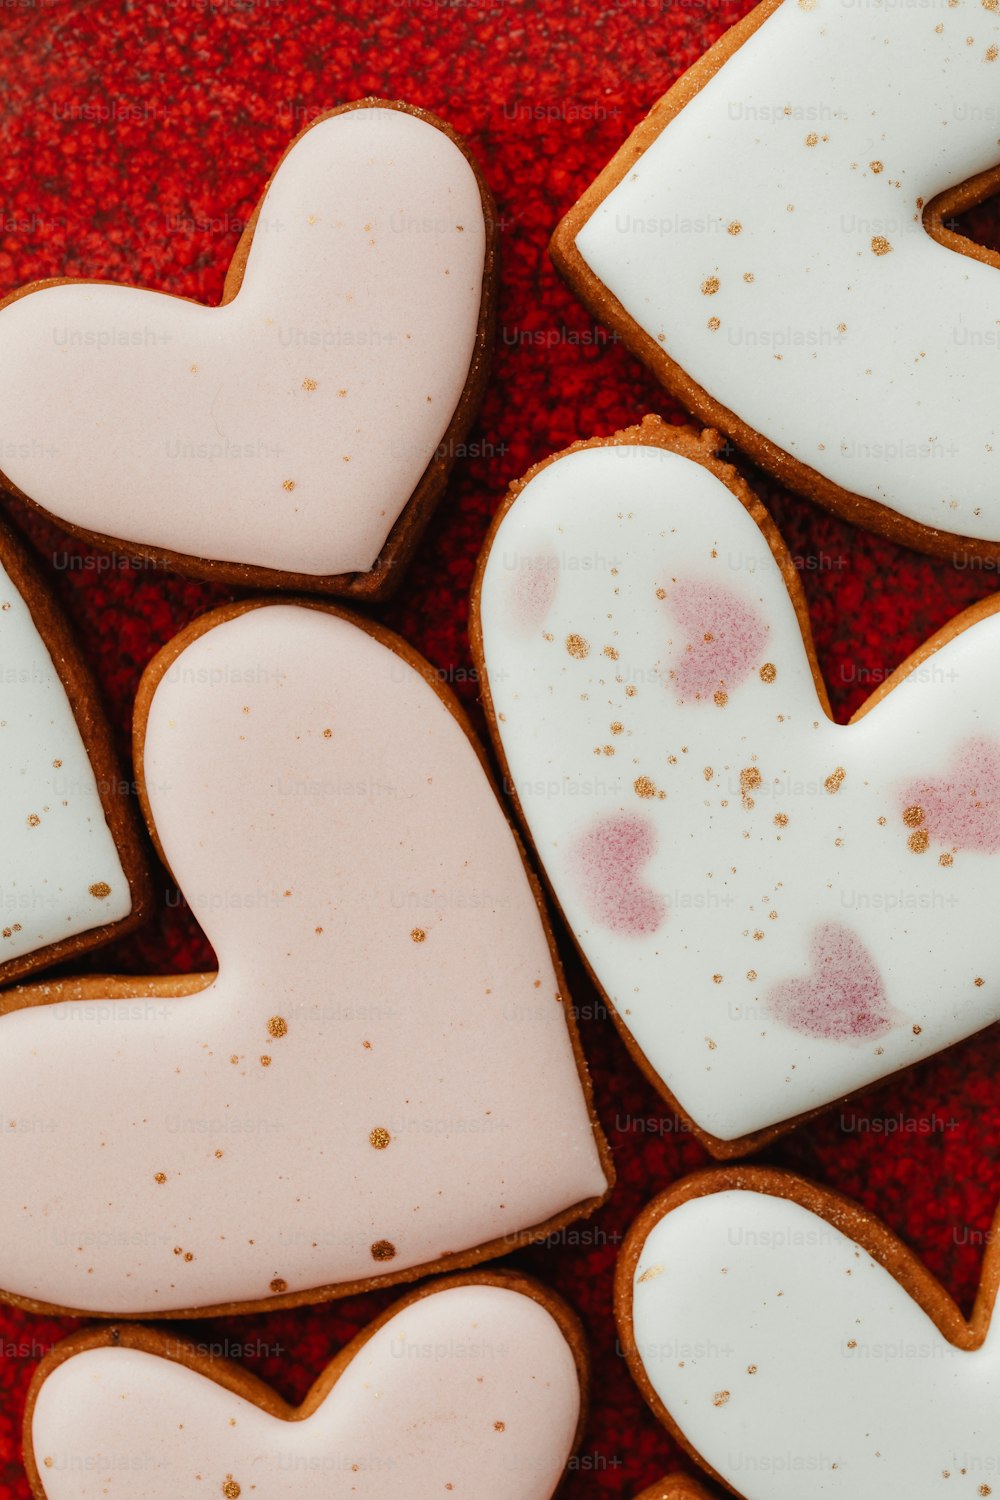 a close up of some heart shaped cookies